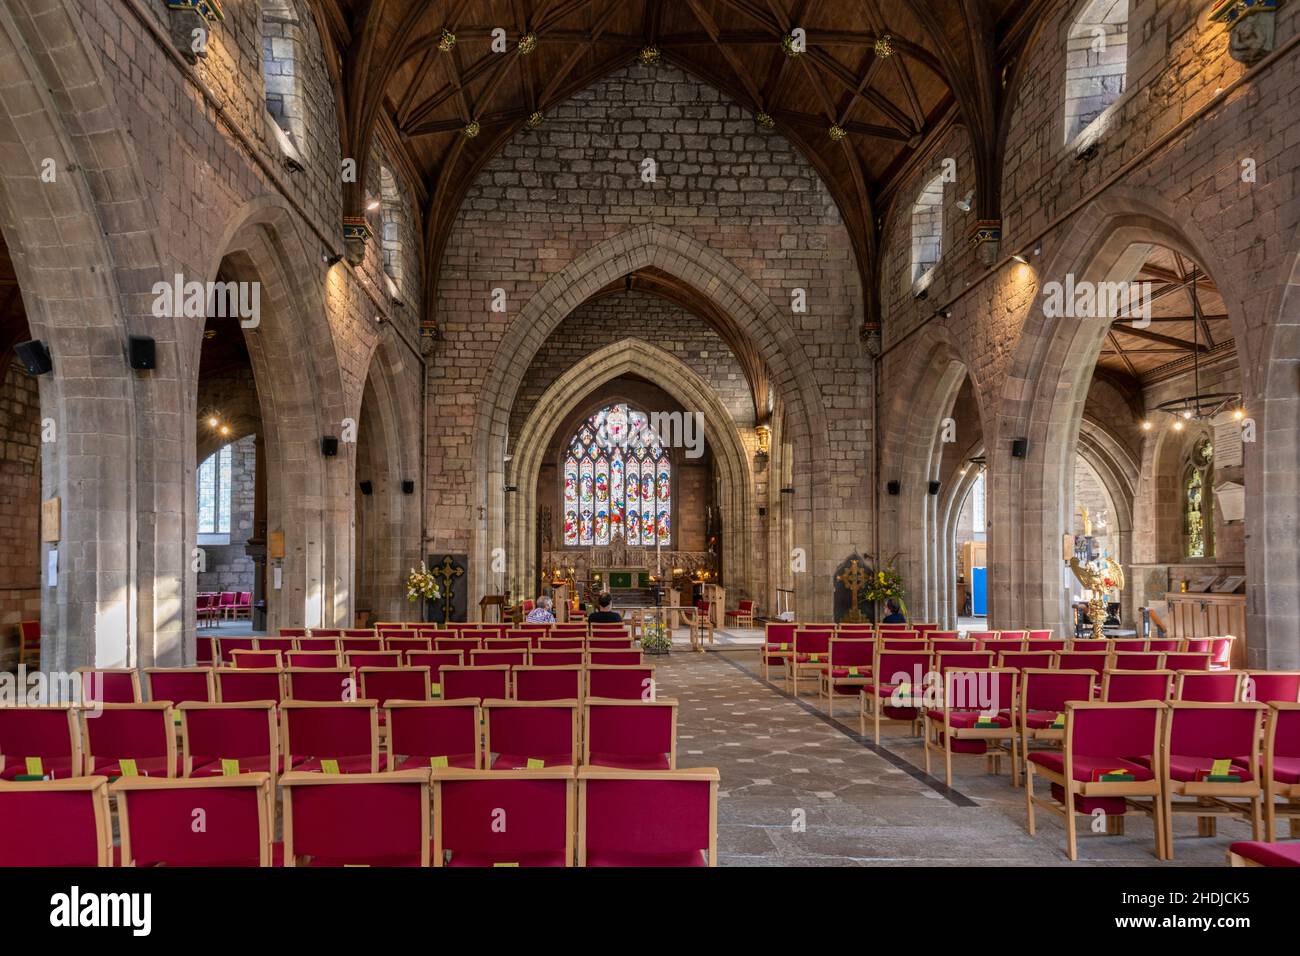 St Asaph Cathedral, High Street,  St Asaph , Denbighshire, North Wales, Wales, UK - interior view of nave and altar. Stock Photo